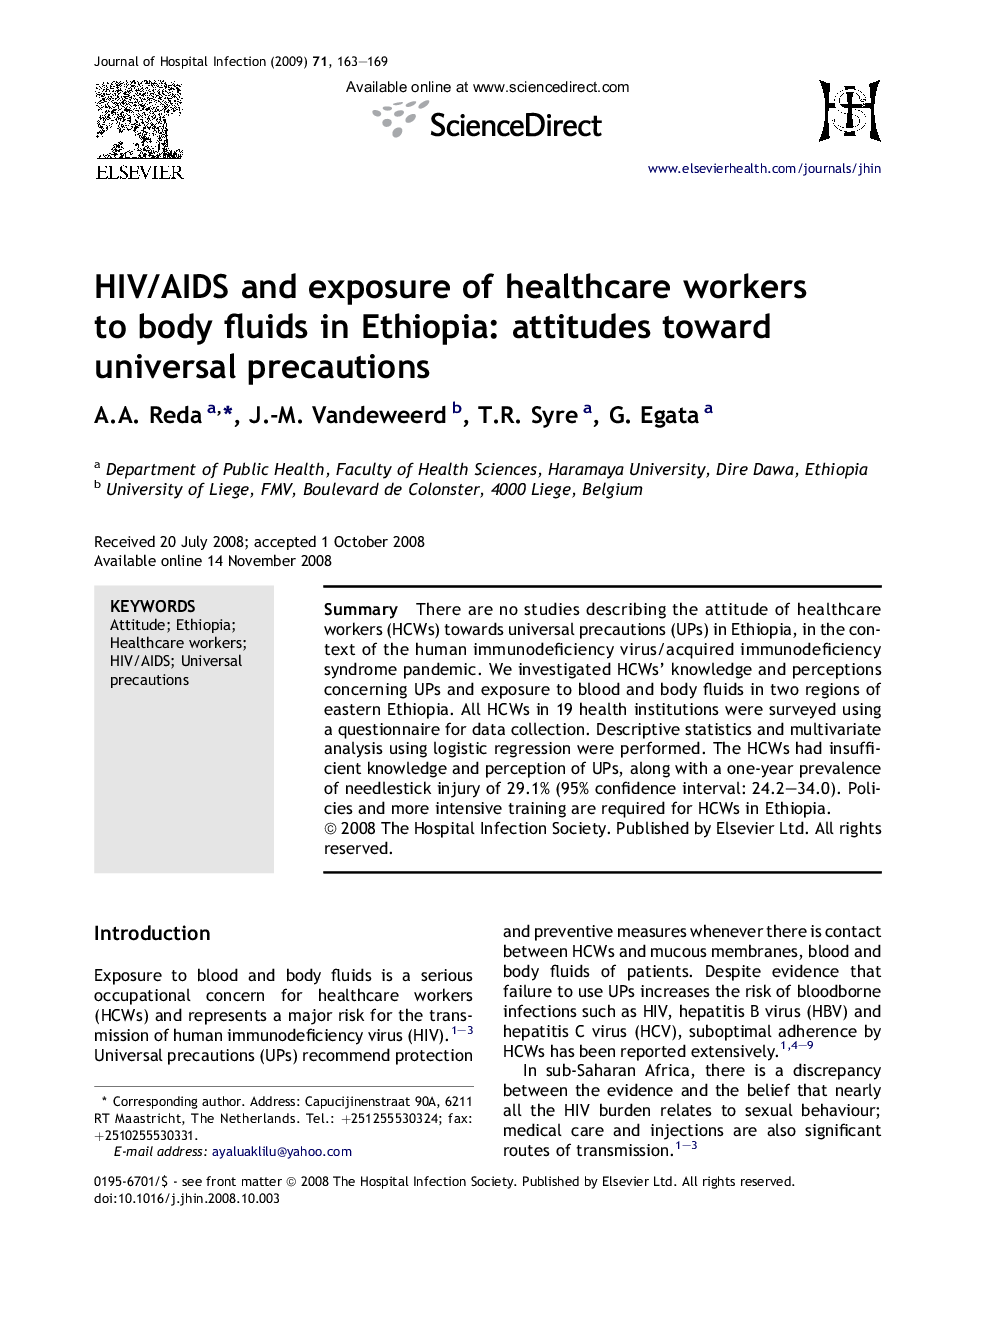 HIV/AIDS and exposure of healthcare workers to body fluids in Ethiopia: attitudes toward universal precautions